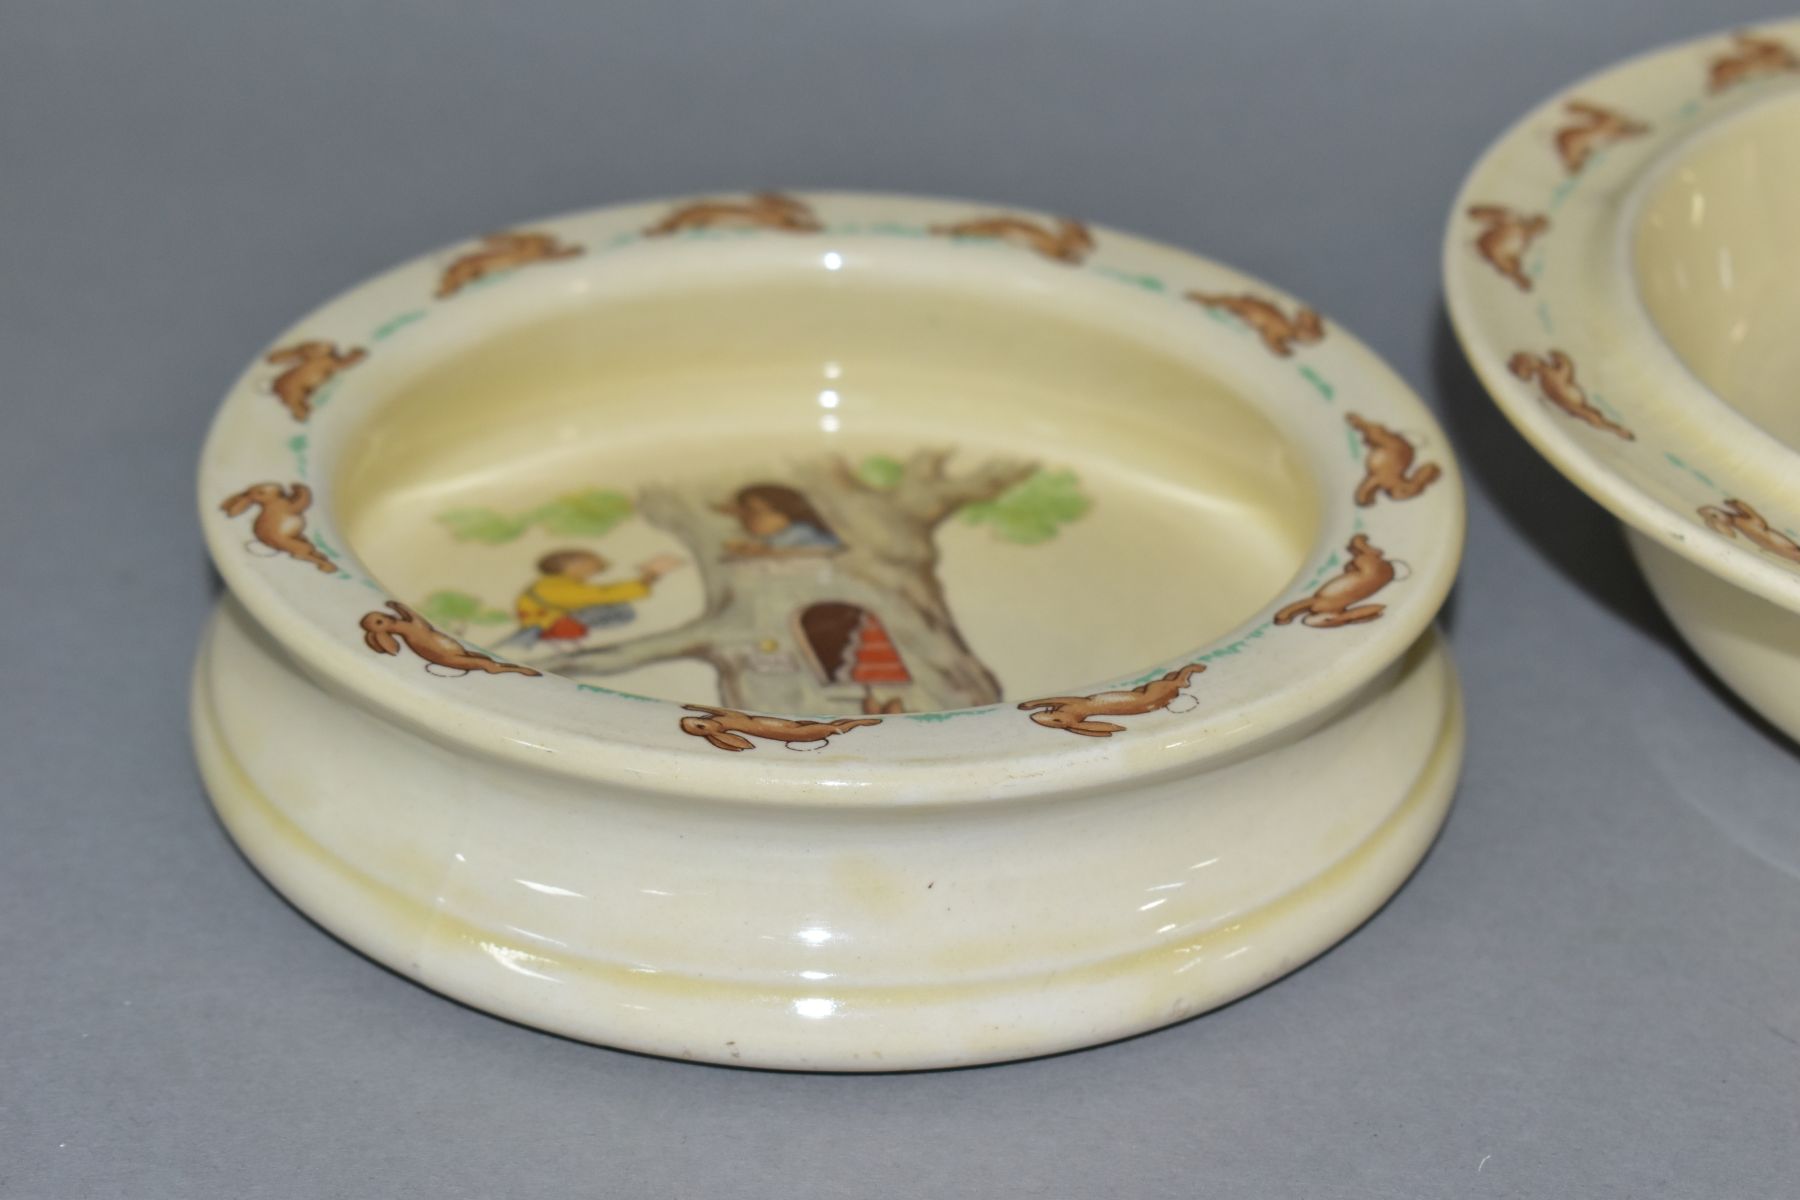 TWO PIECES OF ROYAL DOULTON BUNNYKINS EARTHENWARE TABLEWARES OF AIRMAIL DELIVERY SCENE LFa by - Image 5 of 7